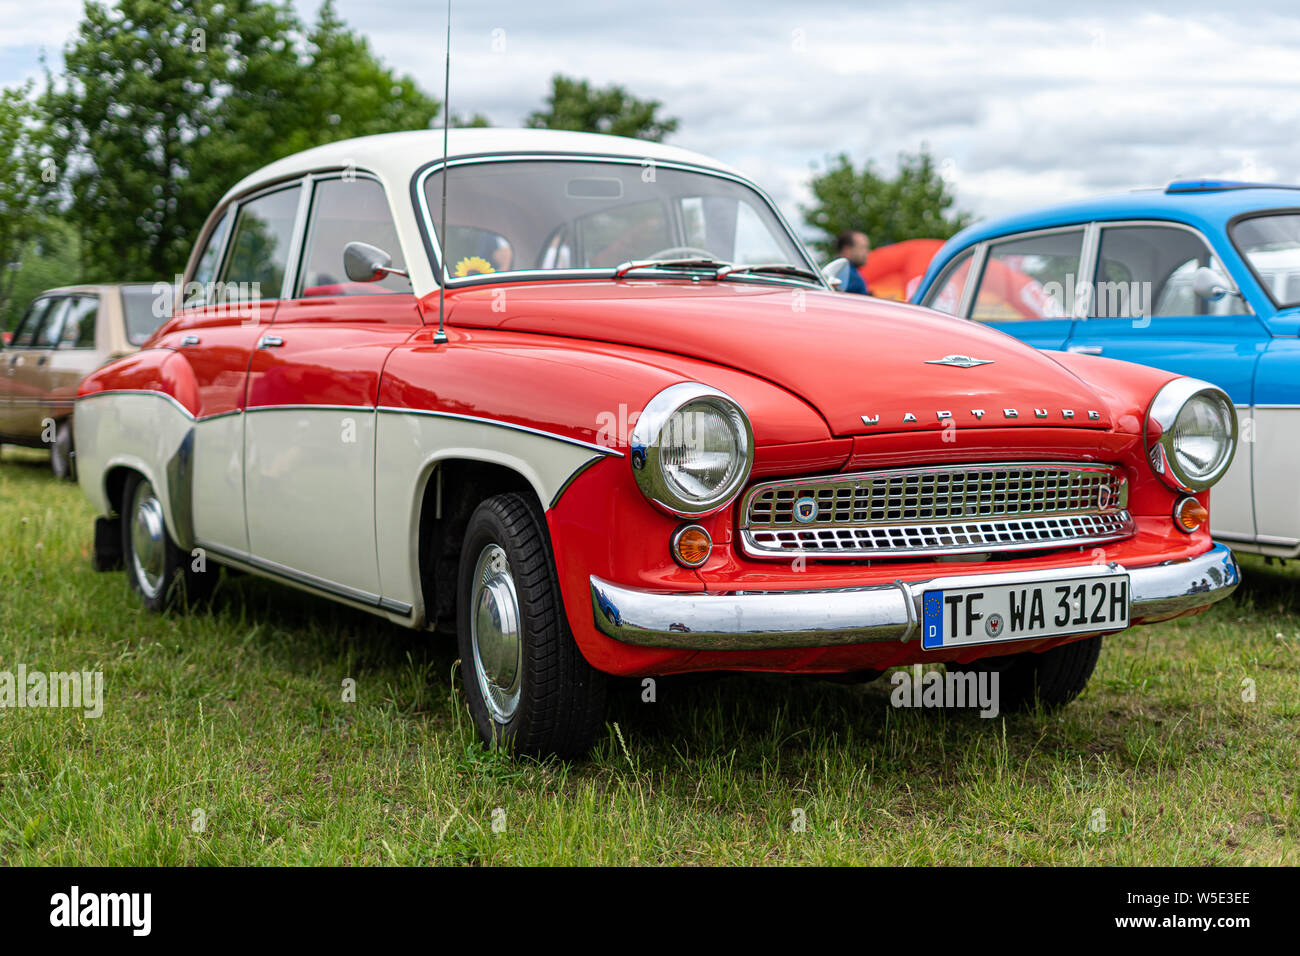 Page 2 - Wartburg Auto High Resolution Stock Photography and Images - Alamy